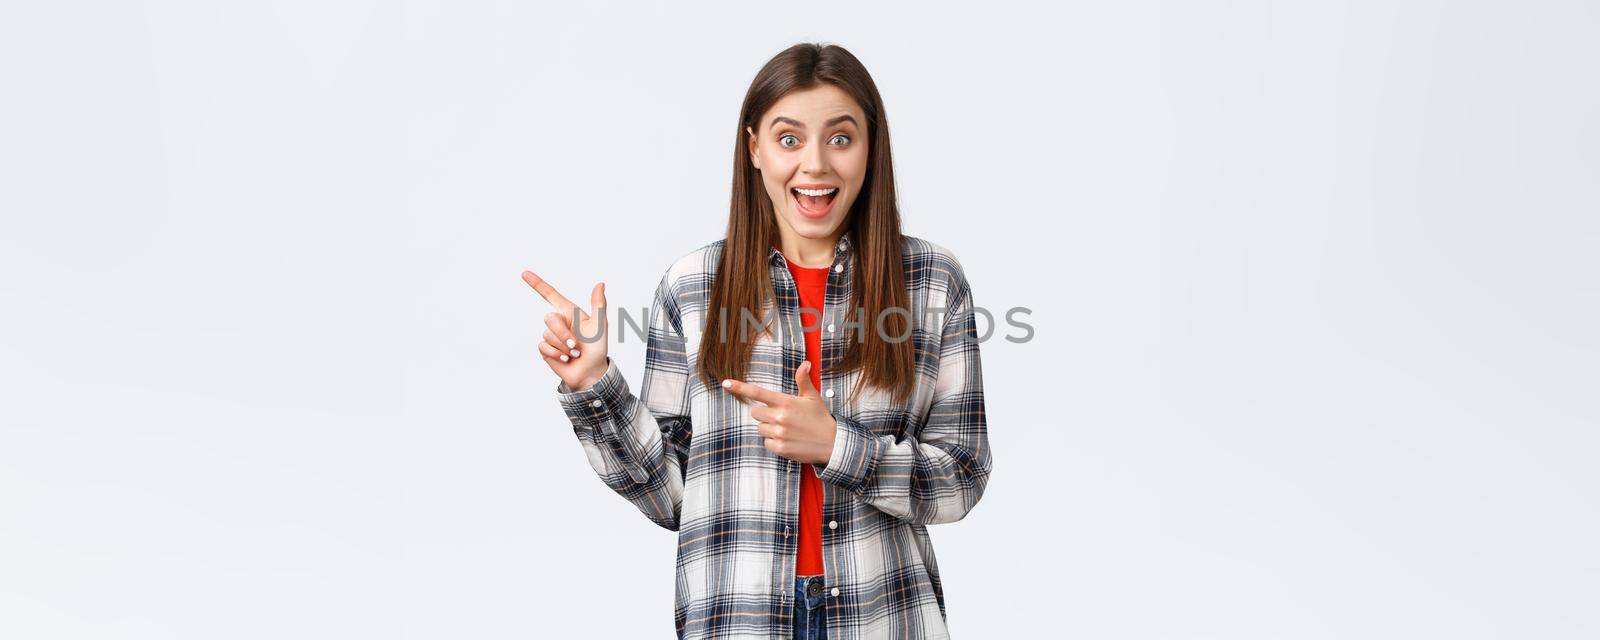 Lifestyle, different emotions, leisure activities concept. Excited female customer hear special discounts pointing shop promo. Astonished woman smiling happy and showing way, indicate left banner.